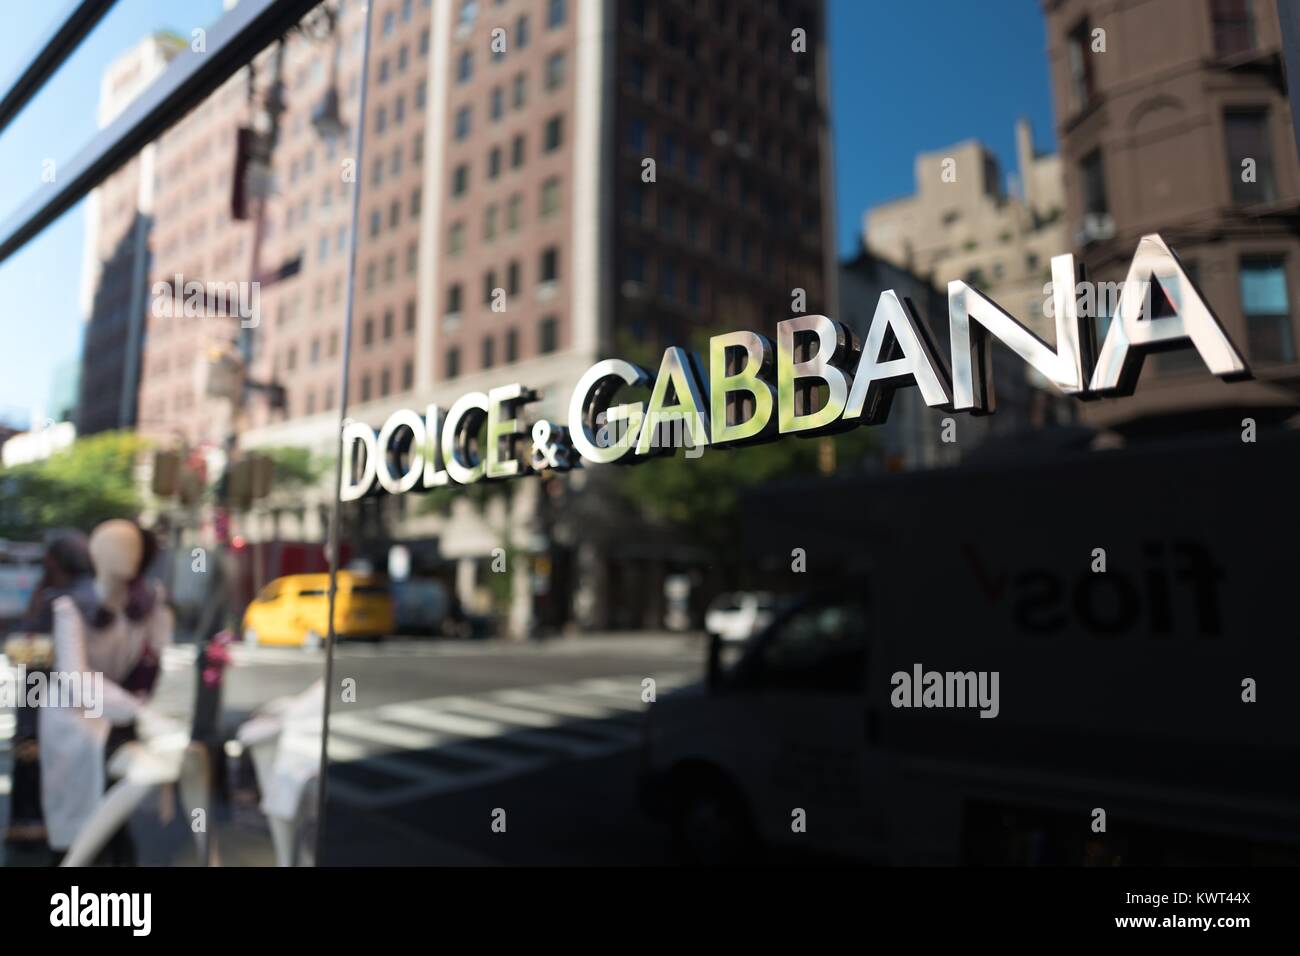 Signage for the Dolce and Gabbana upscale clothing boutique on Madison Avenue on the Upper East Side of Manhattan, New York City, New York, September 15, 2017. () Stock Photo